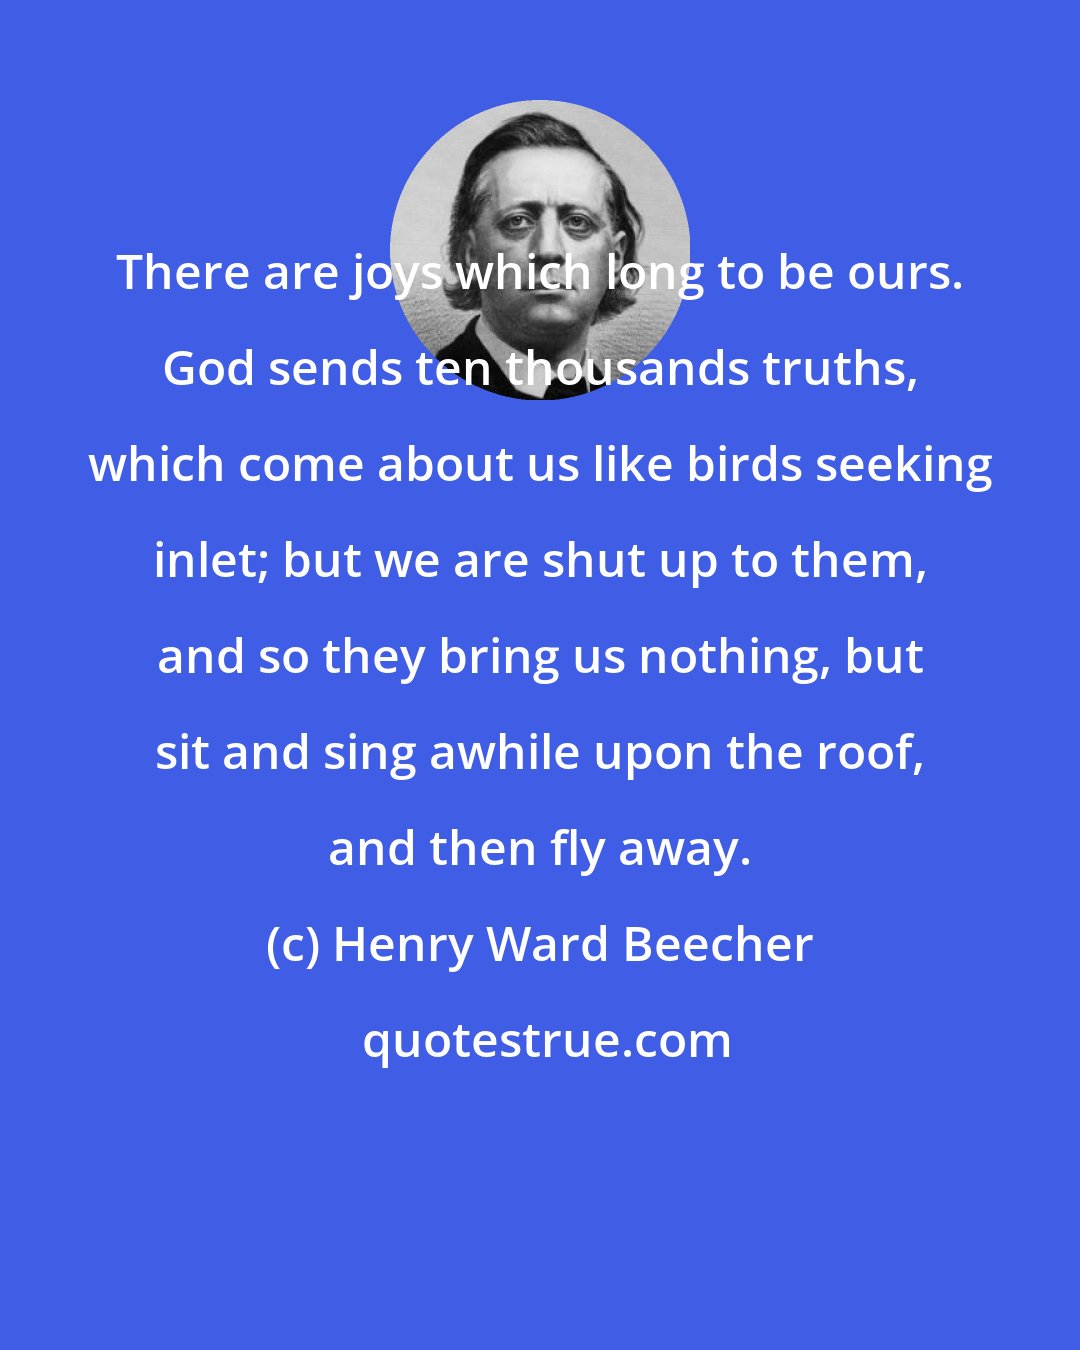 Henry Ward Beecher: There are joys which long to be ours. God sends ten thousands truths, which come about us like birds seeking inlet; but we are shut up to them, and so they bring us nothing, but sit and sing awhile upon the roof, and then fly away.